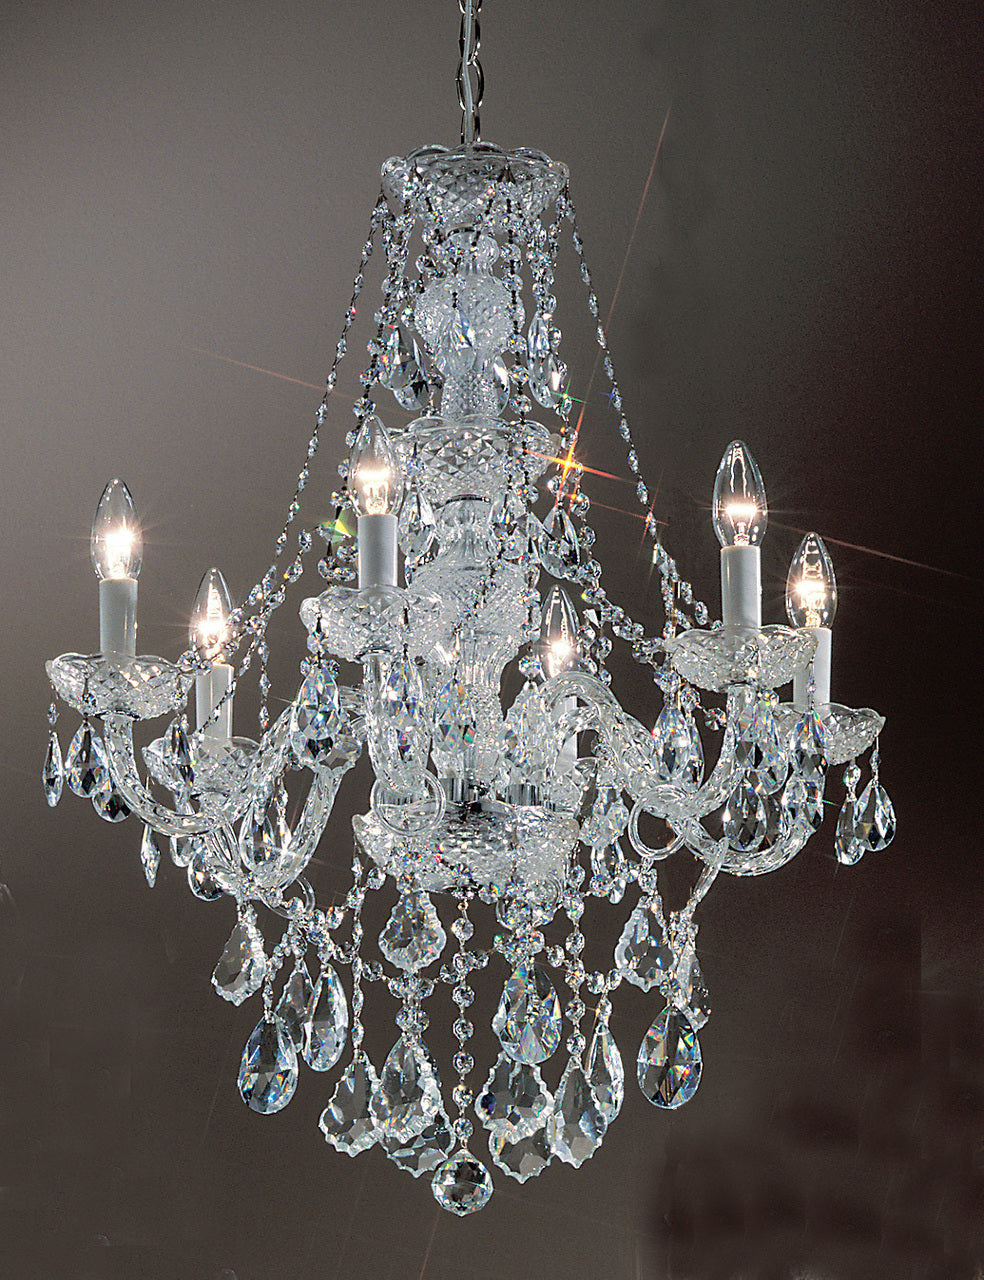 Classic Lighting 8256 CH C Monticello Crystal/Glass Chandelier in Chrome